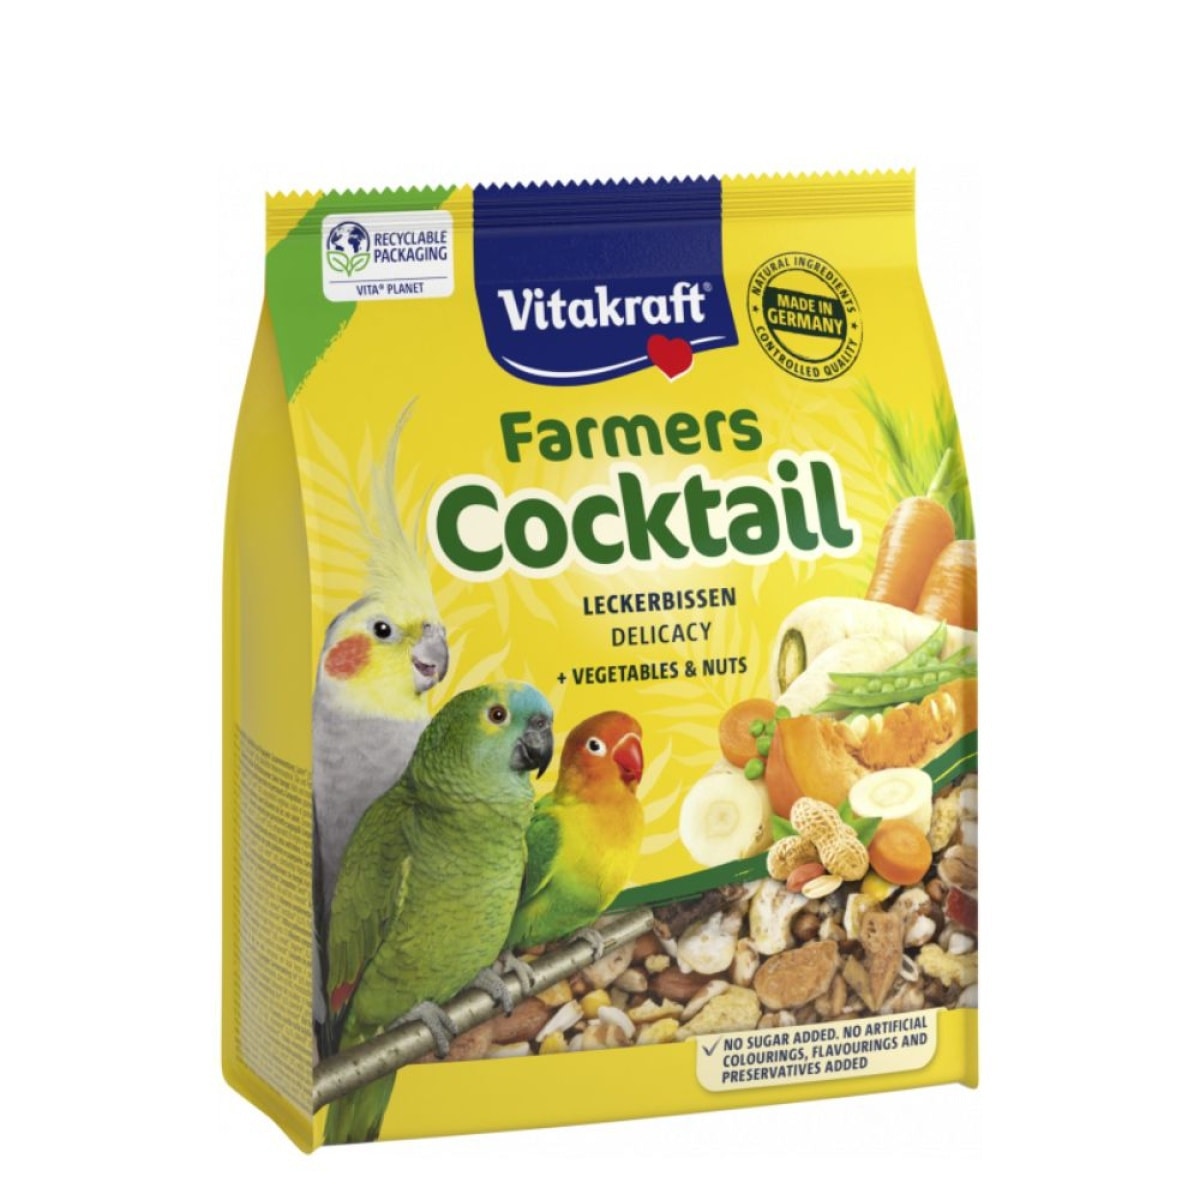 Vitakraft Farmers Cocktail with Vegetables & Nuts 250g Main Image